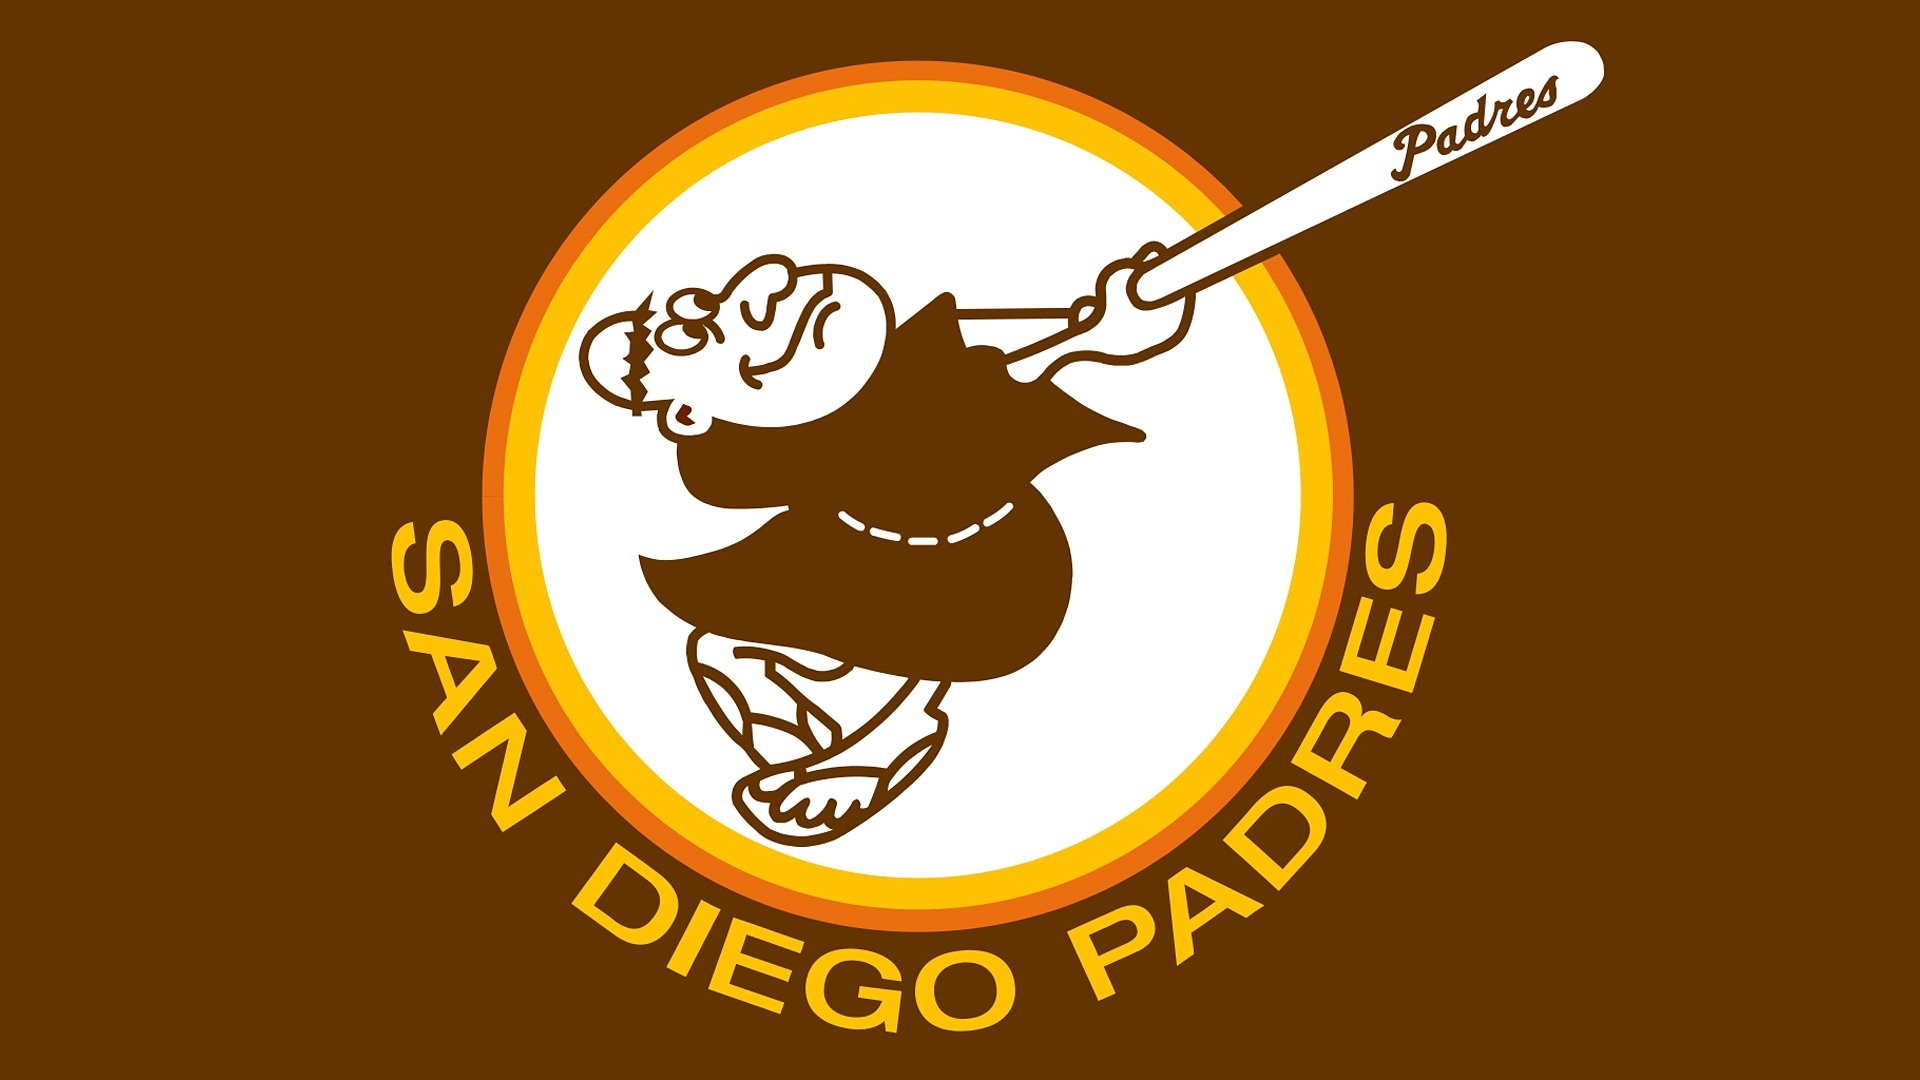 San Diego Padres, HD wallpapers, Unique backgrounds, 1920x1080 Full HD Desktop